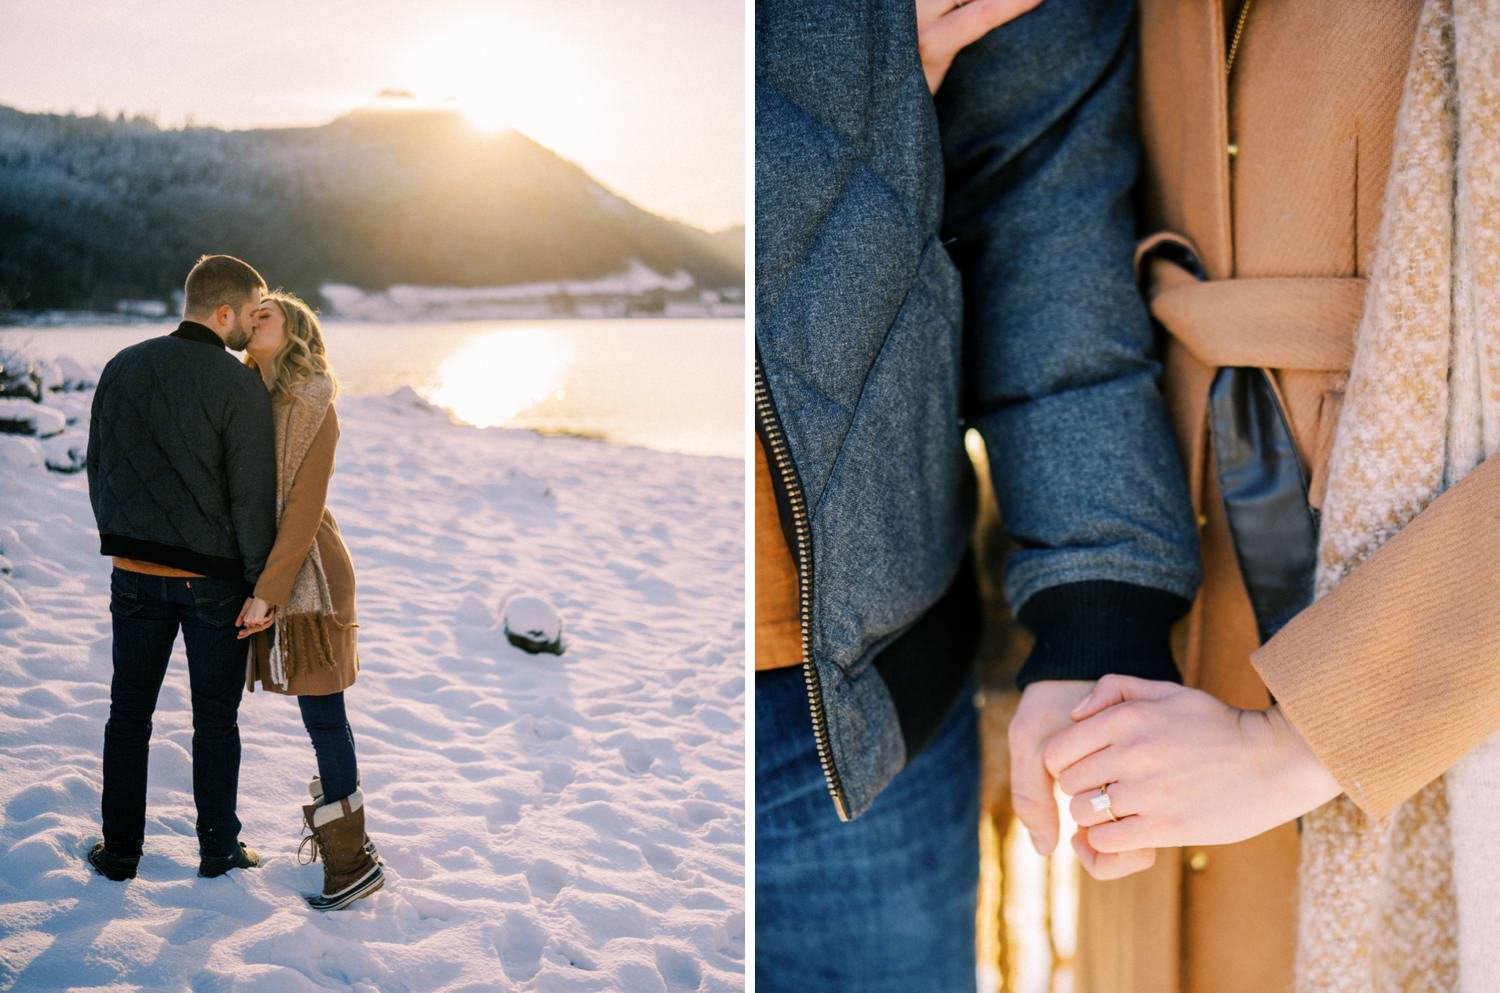 06_Snowy engagement photos at Snoqualmie Pass near Seattle, with a film-like style by Ryan Flynn Photography.jpg